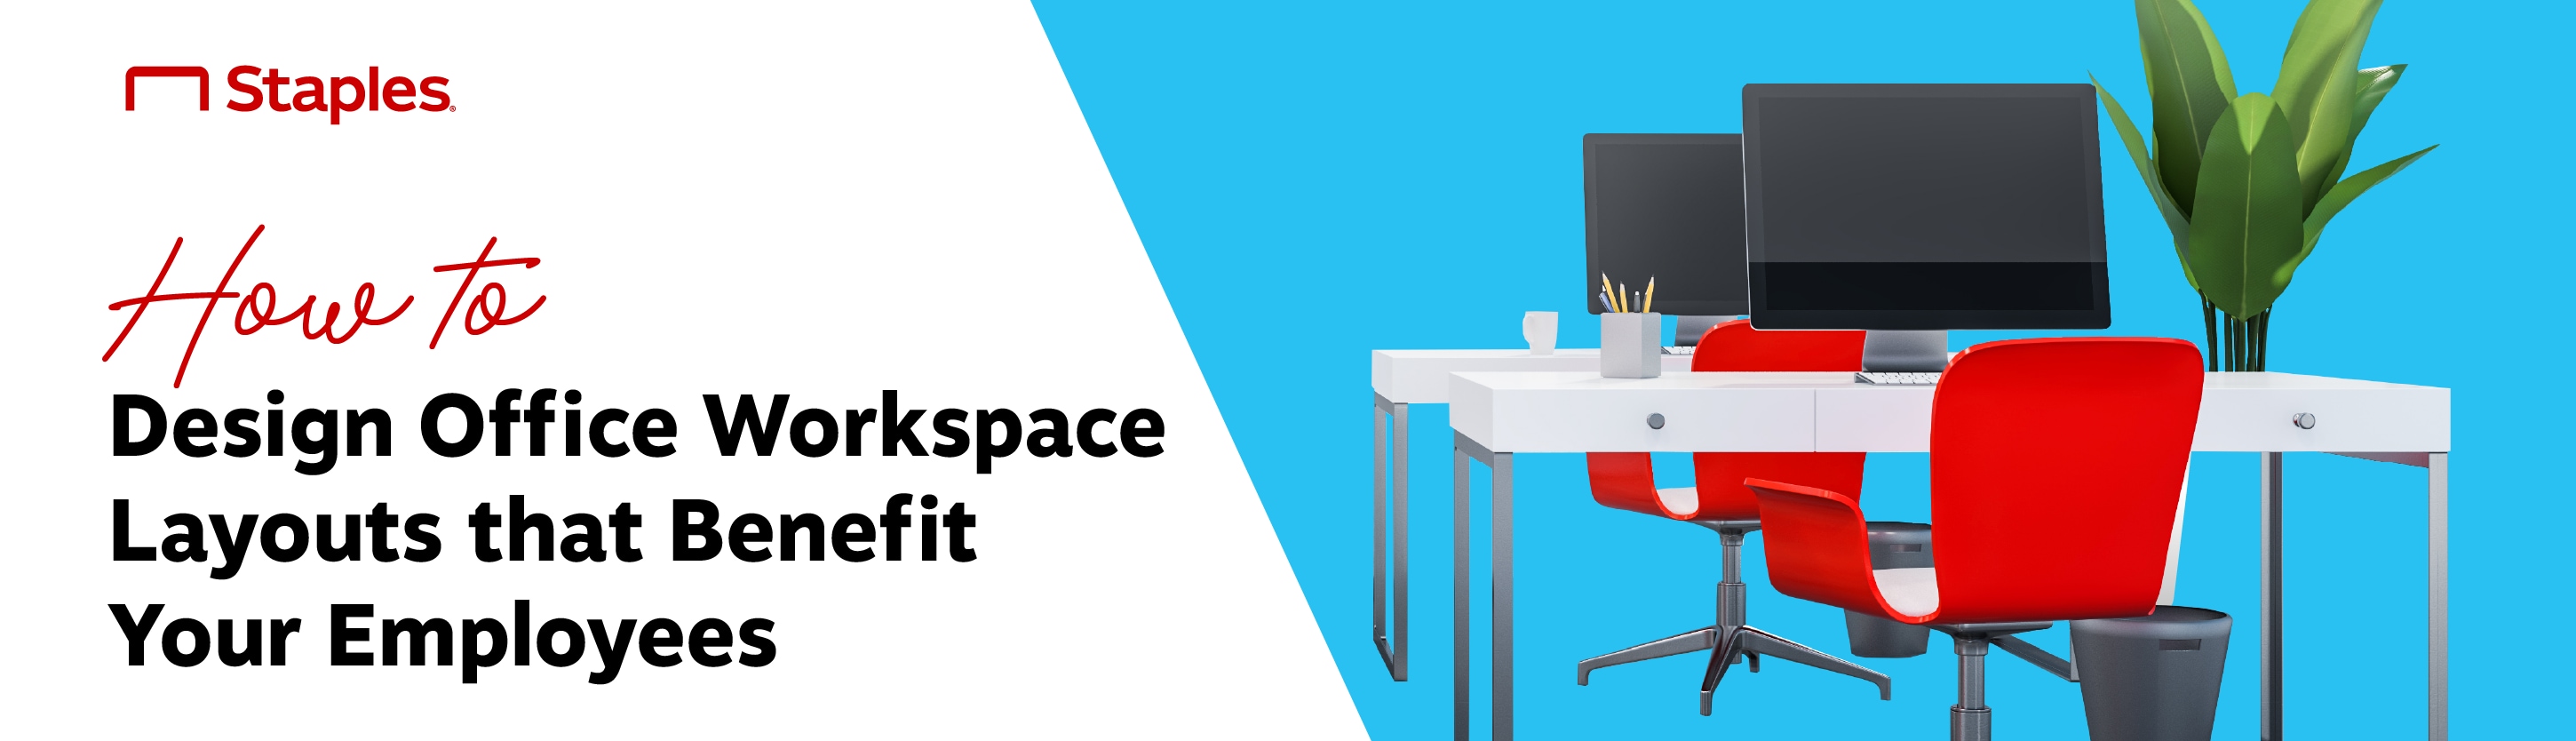 How to Design Office Workspace Layouts that Benefit your Employees Thumbnail